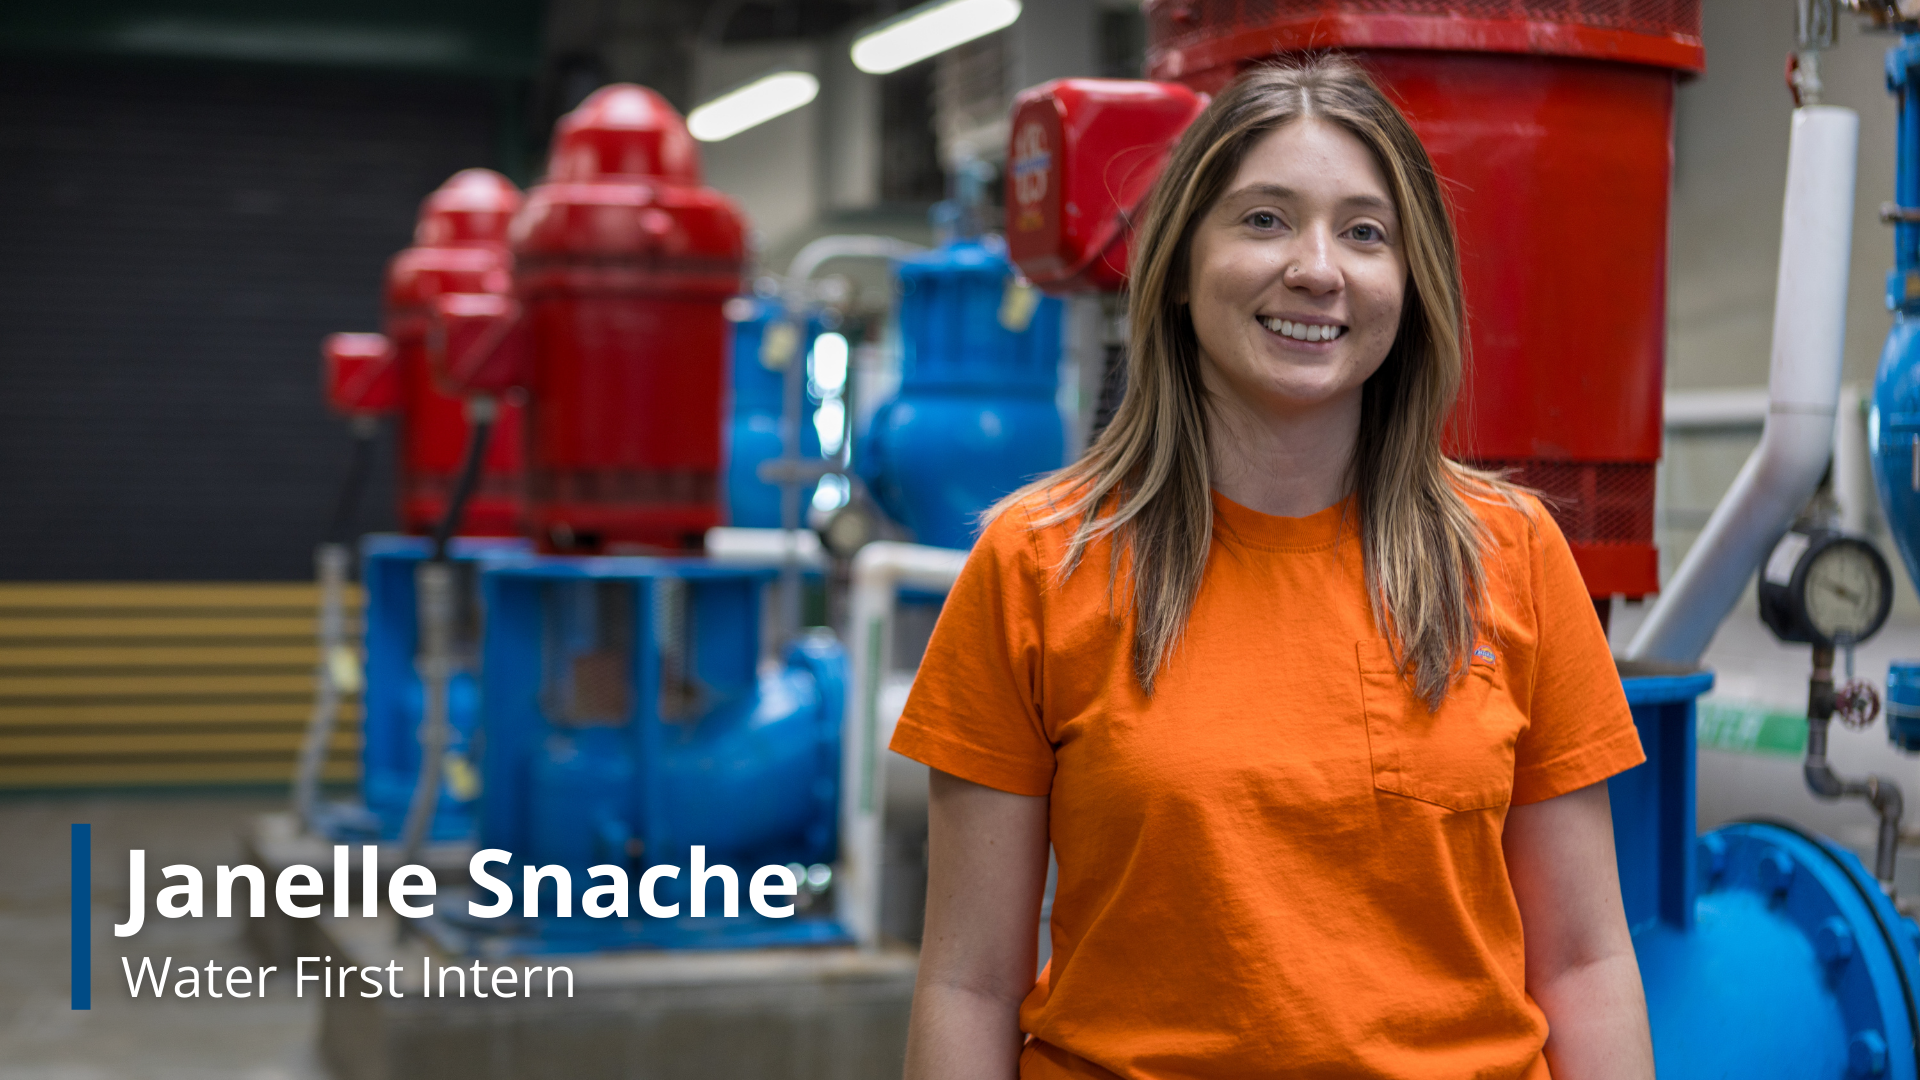 A photo of Janelle Snache, a Water First Intern, at the water treatment plant with machines used to treat water in the background.